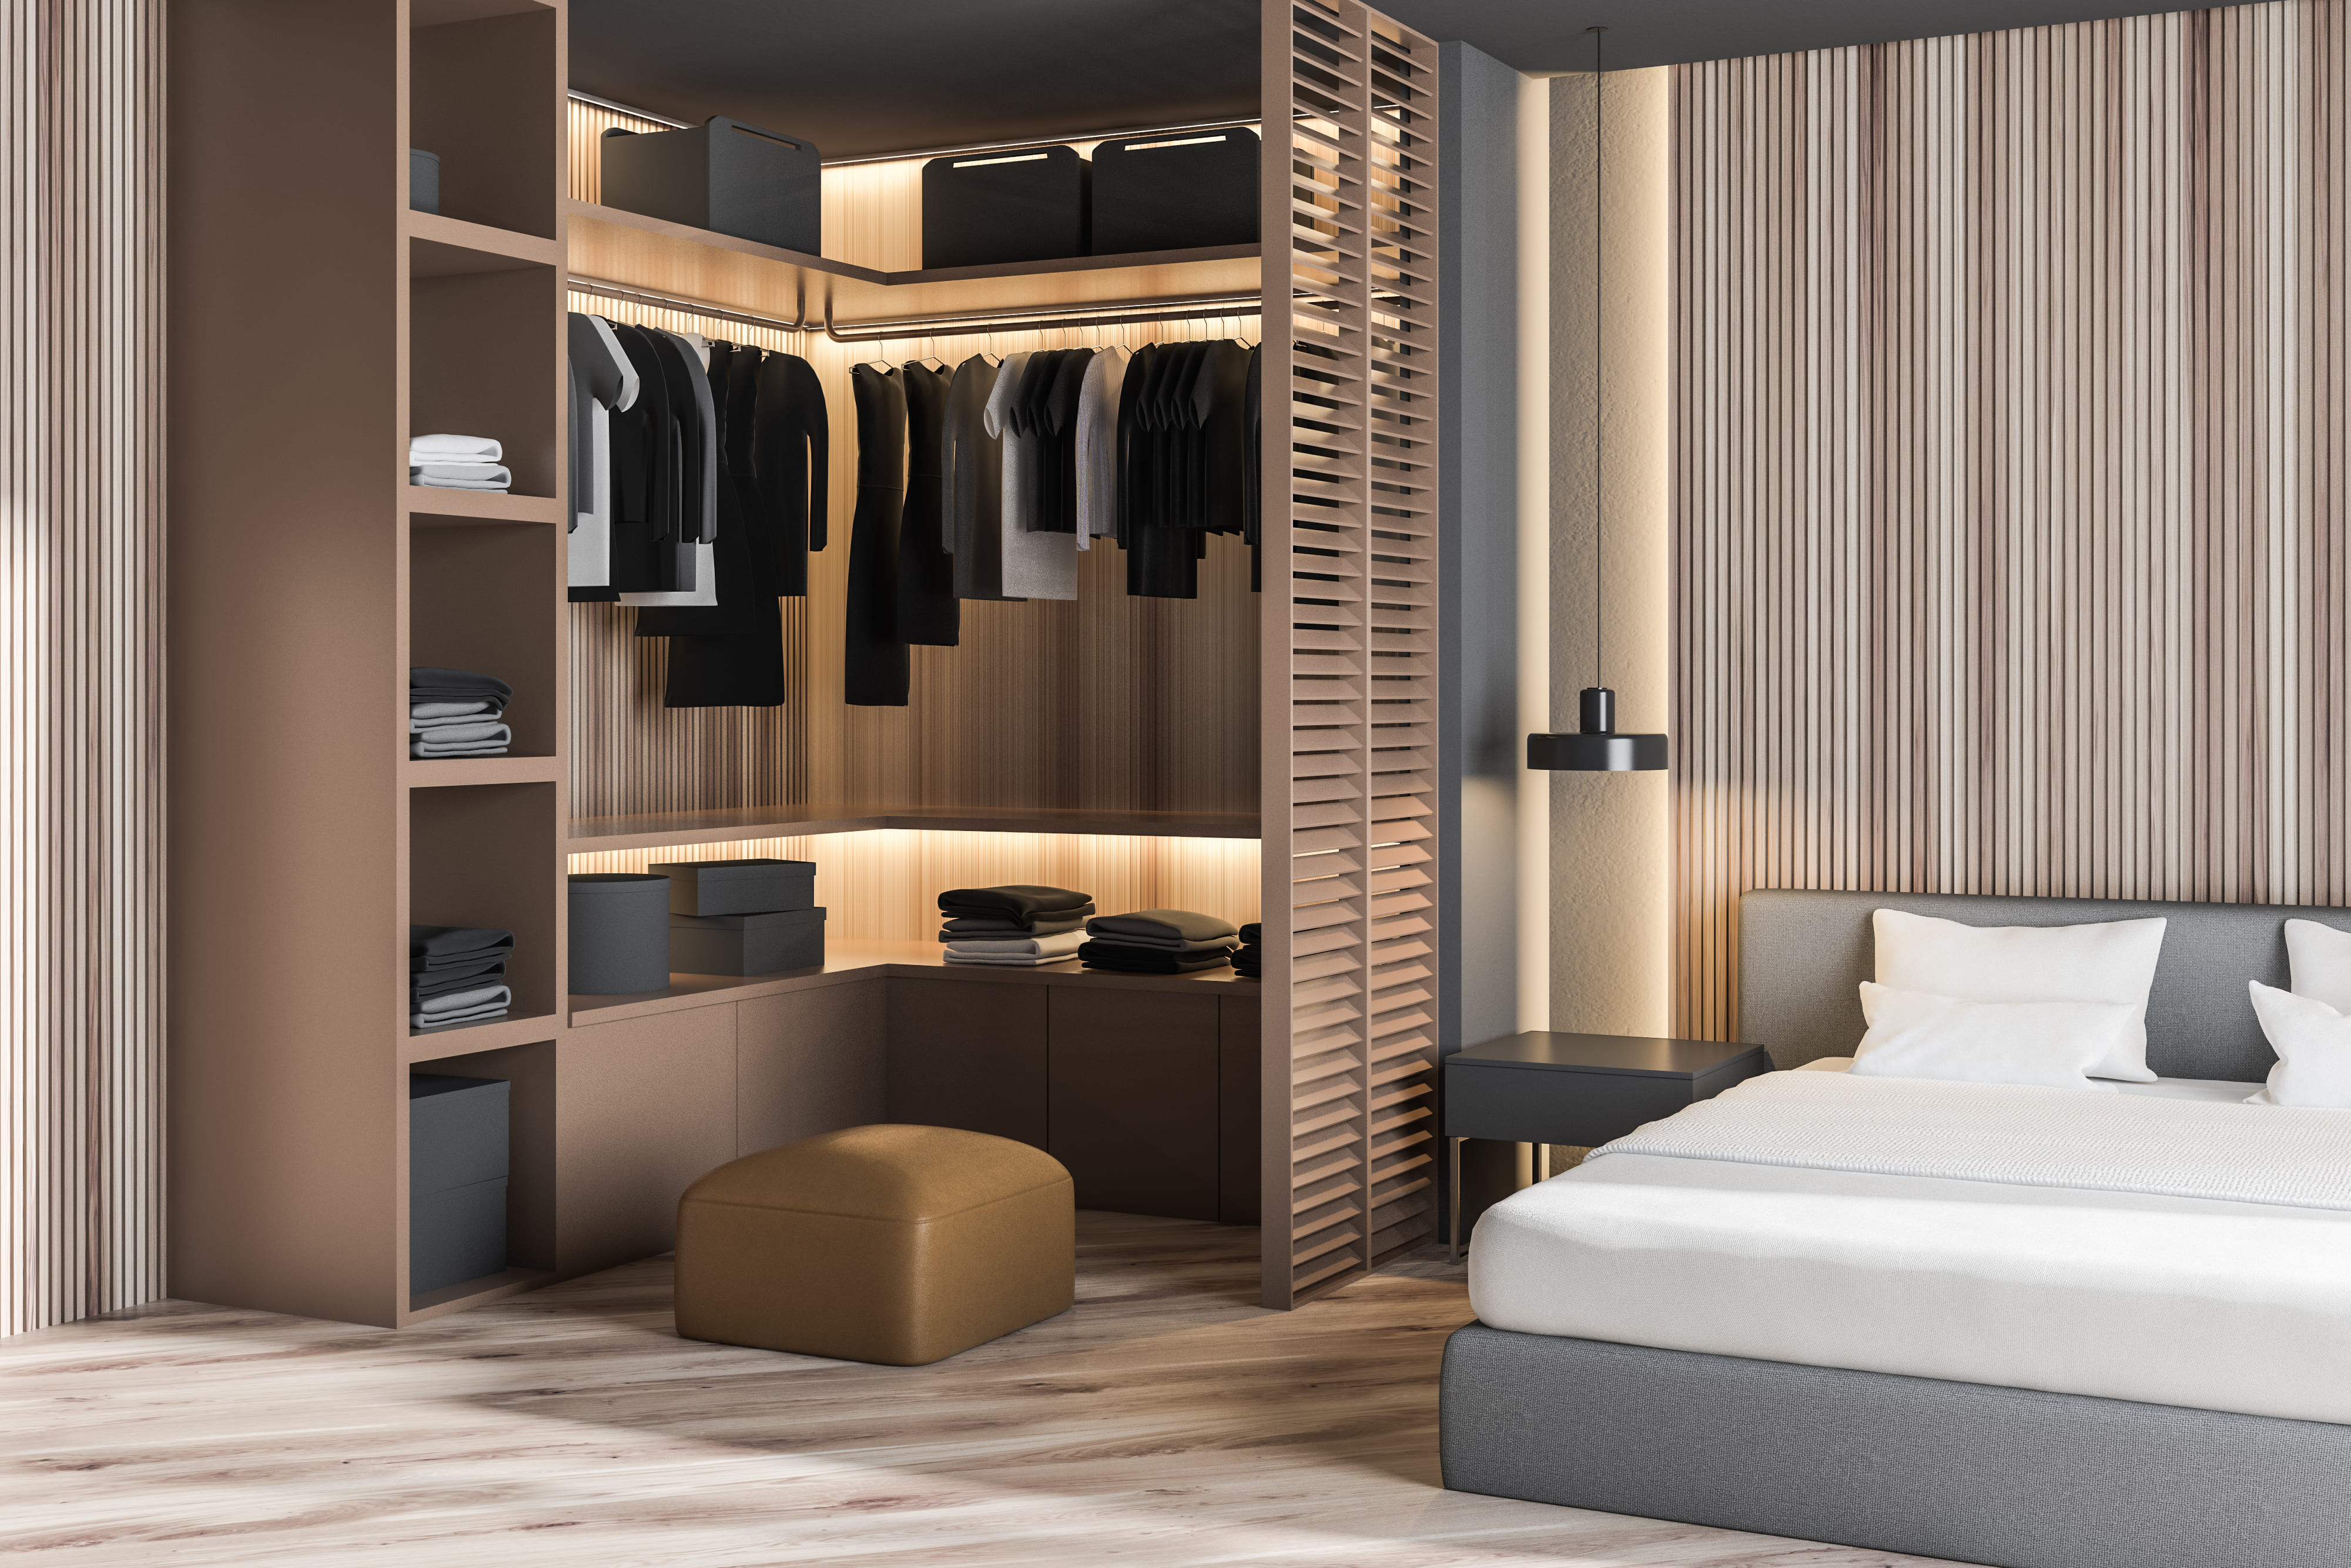 Home interior designers in Bangalore - Best and Simple wardrobe cum Dressing Table Designs For Bedroom